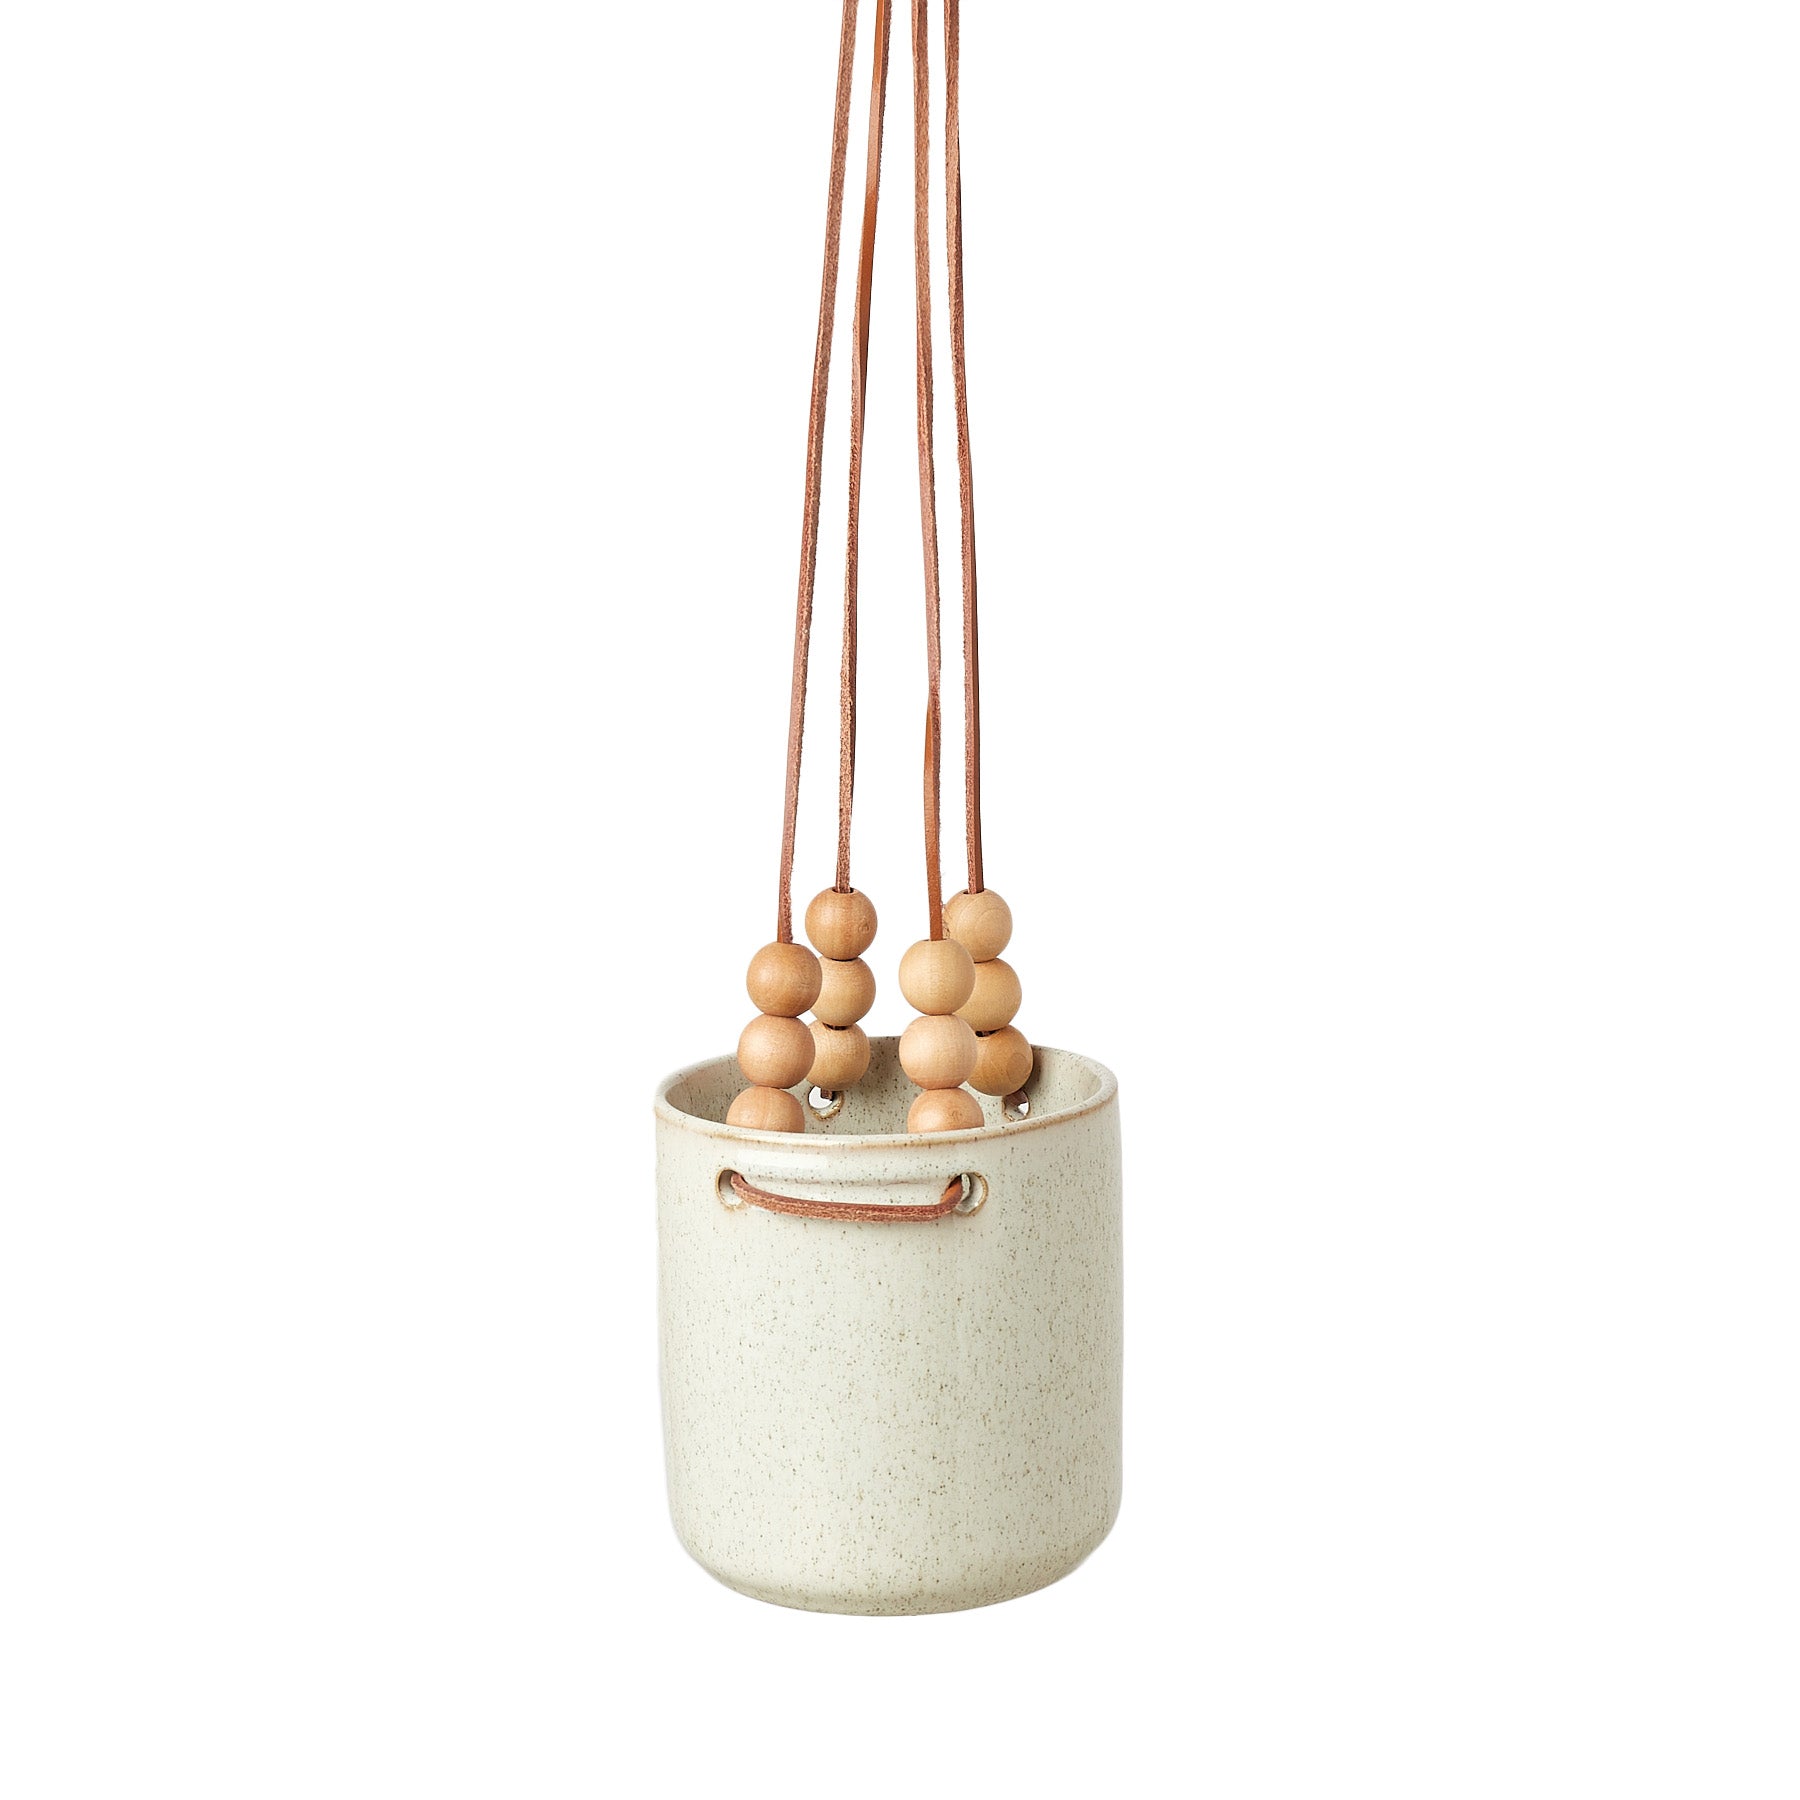 A hanging pot with wooden beads that complements any garden center or plant nursery.